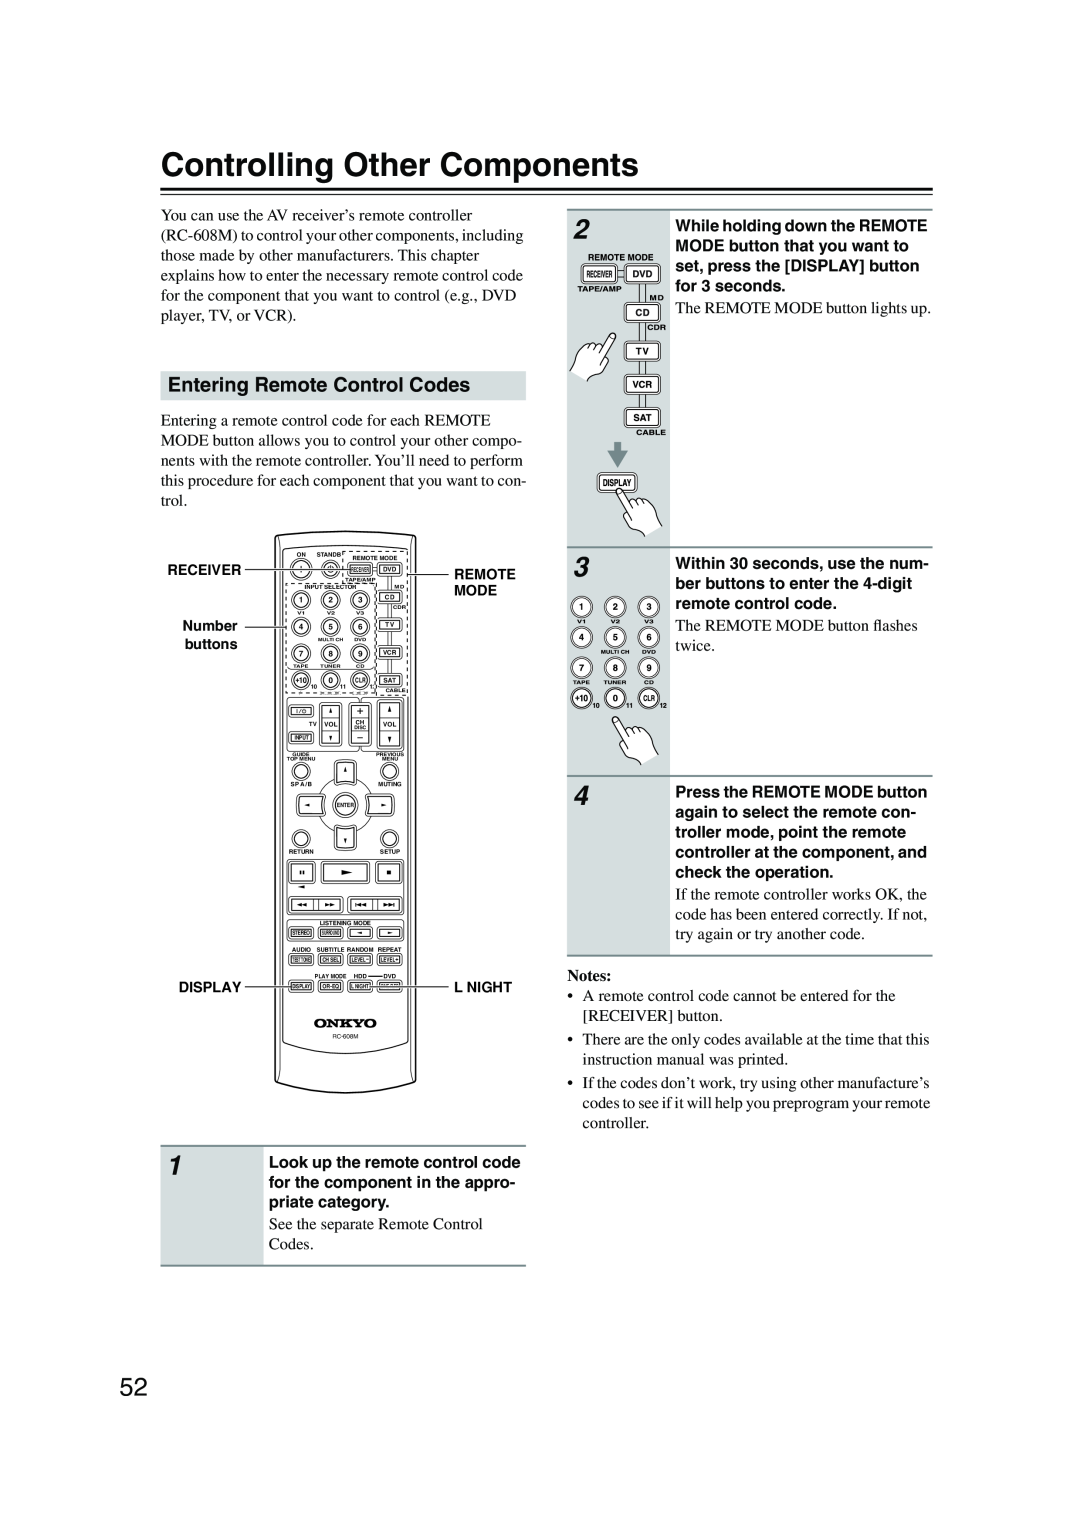 Onkyo HT-S780 instruction manual Controlling Other Components, Entering Remote Control Codes, Notes 